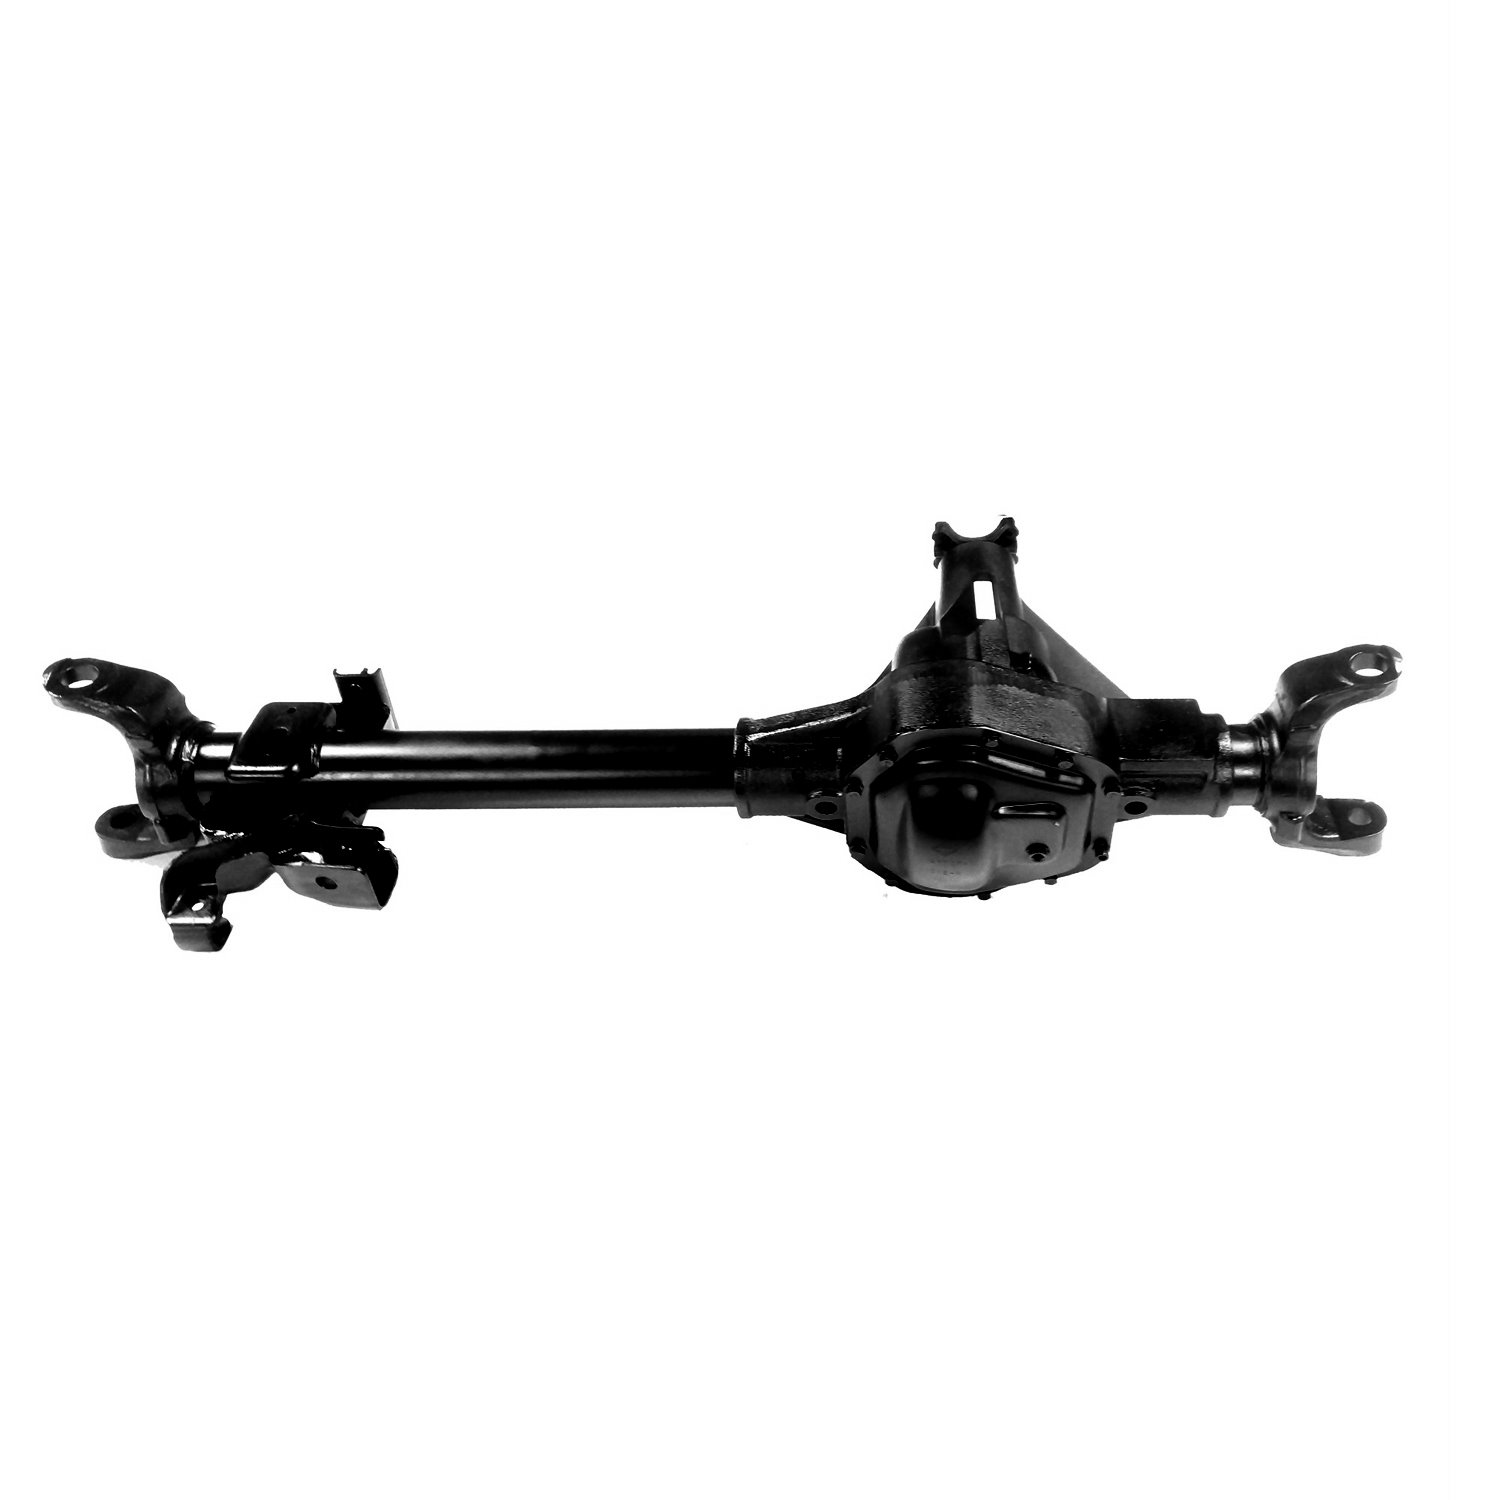 Remanufactured Complete Axle Assembly for Dana 60 2005 Ford F250 & F350 4.11 Ratio